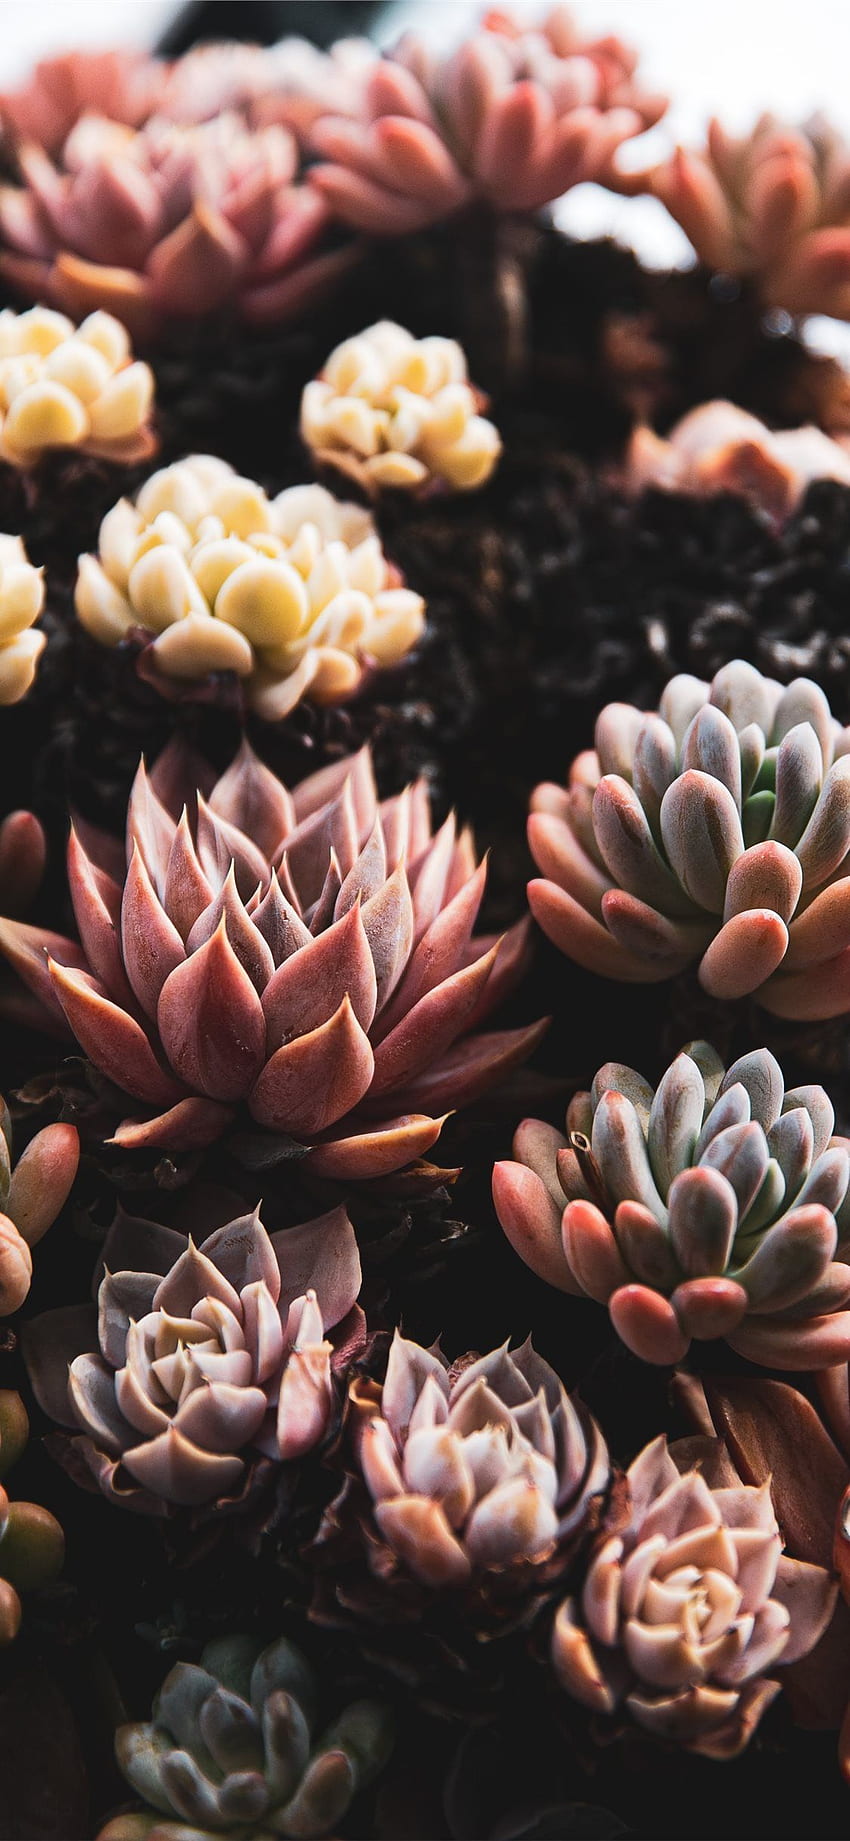 Succulents Photos Download The BEST Free Succulents Stock Photos  HD  Images